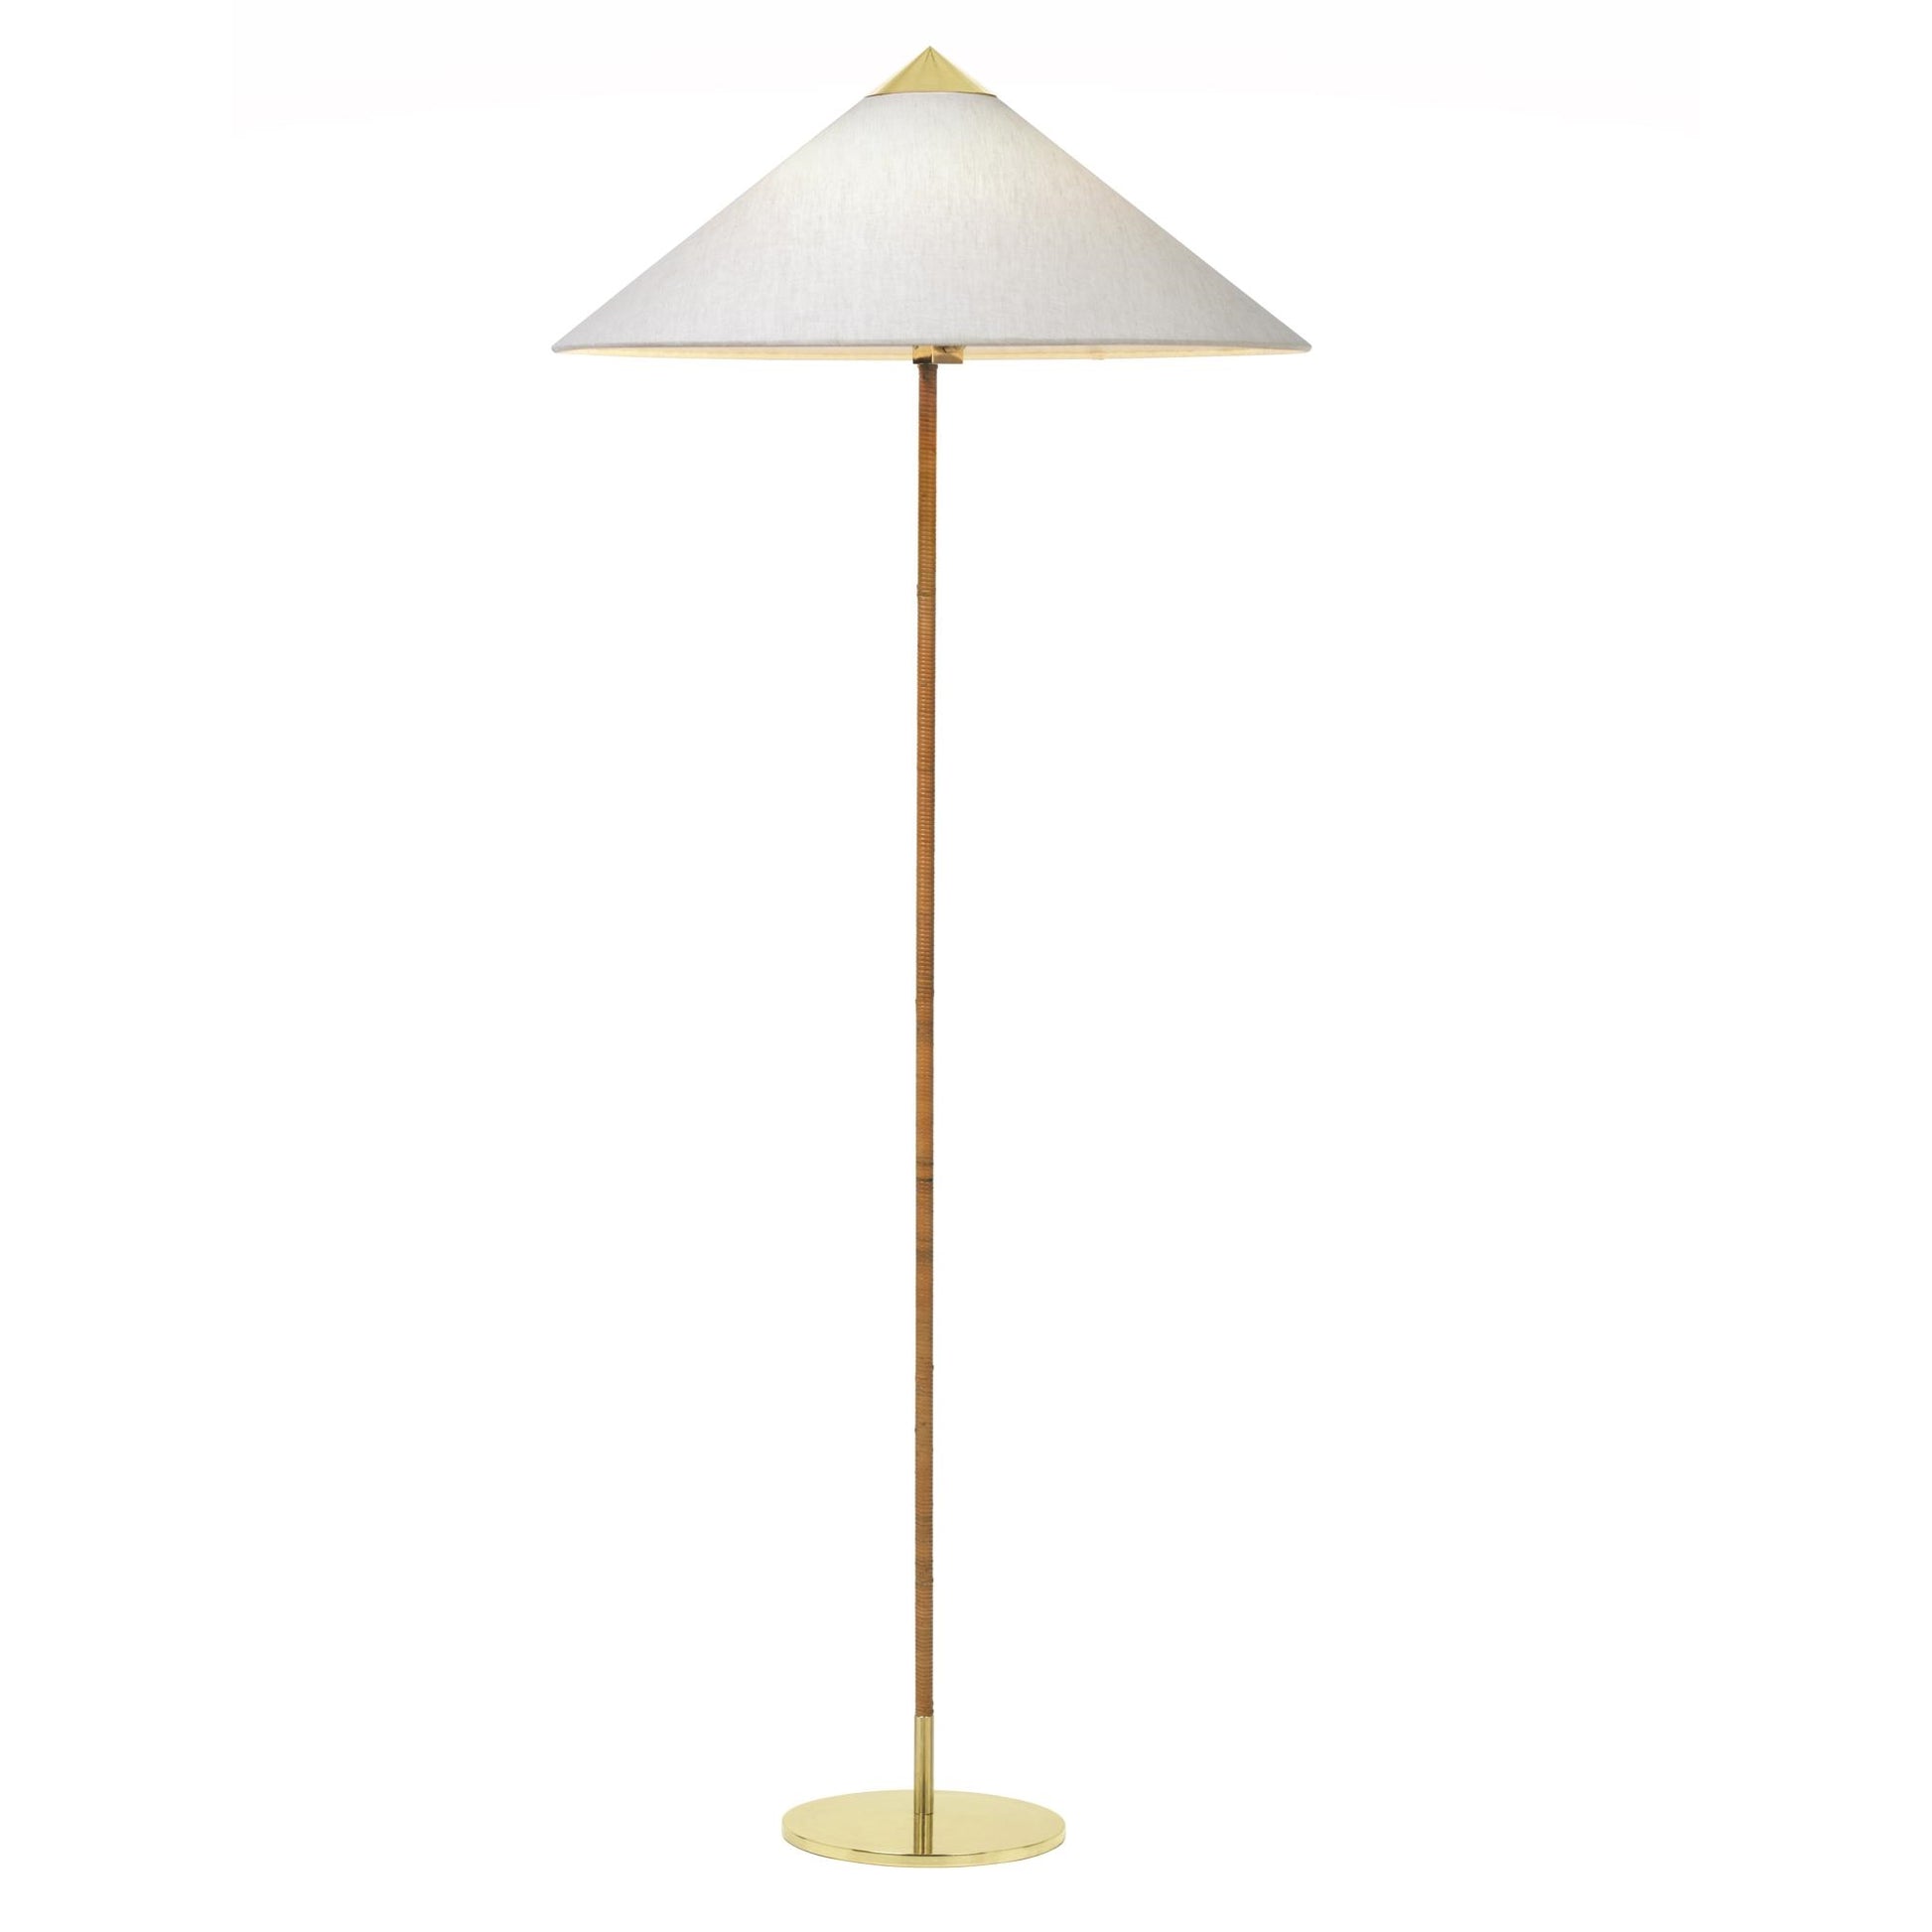 Tynell Collection 9602 Floor Lamp by GUBI #Canvas Shade